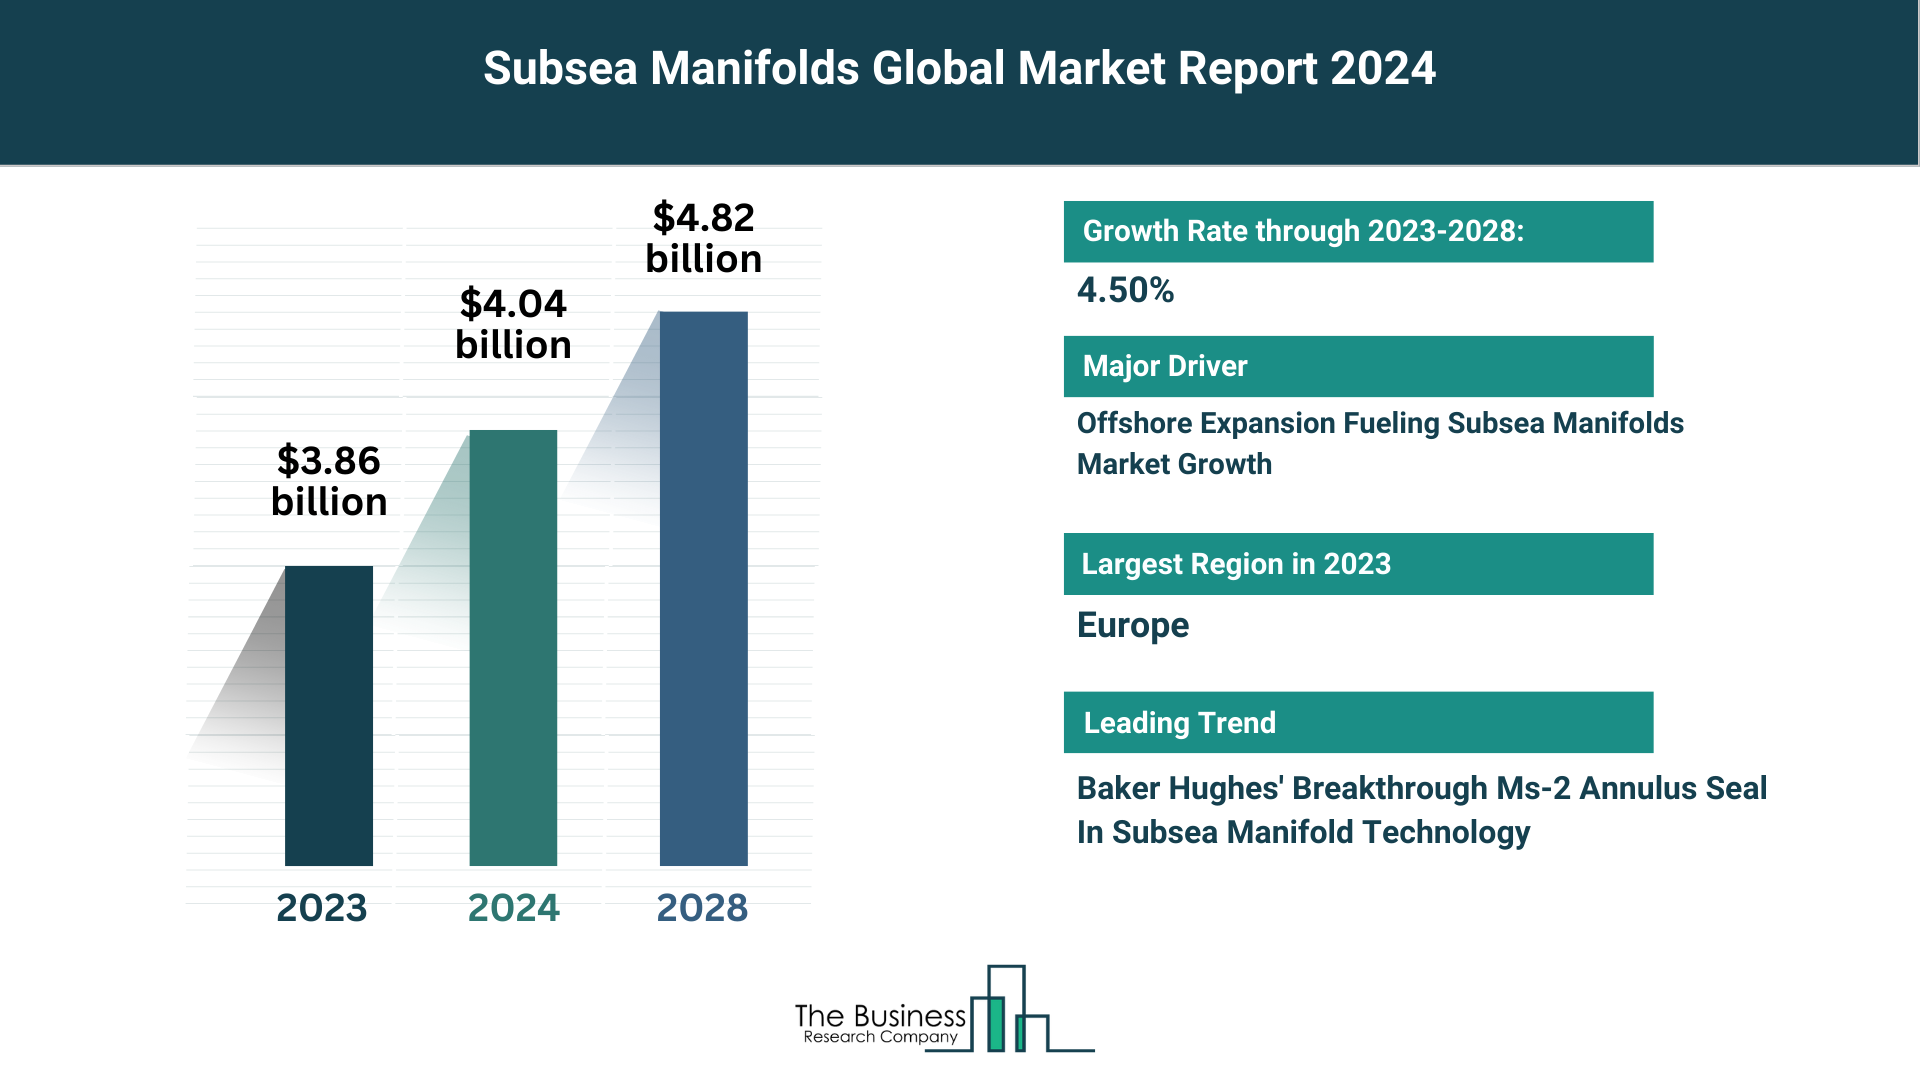 5 Key Takeaways From The Subsea Manifolds Market Report 2024